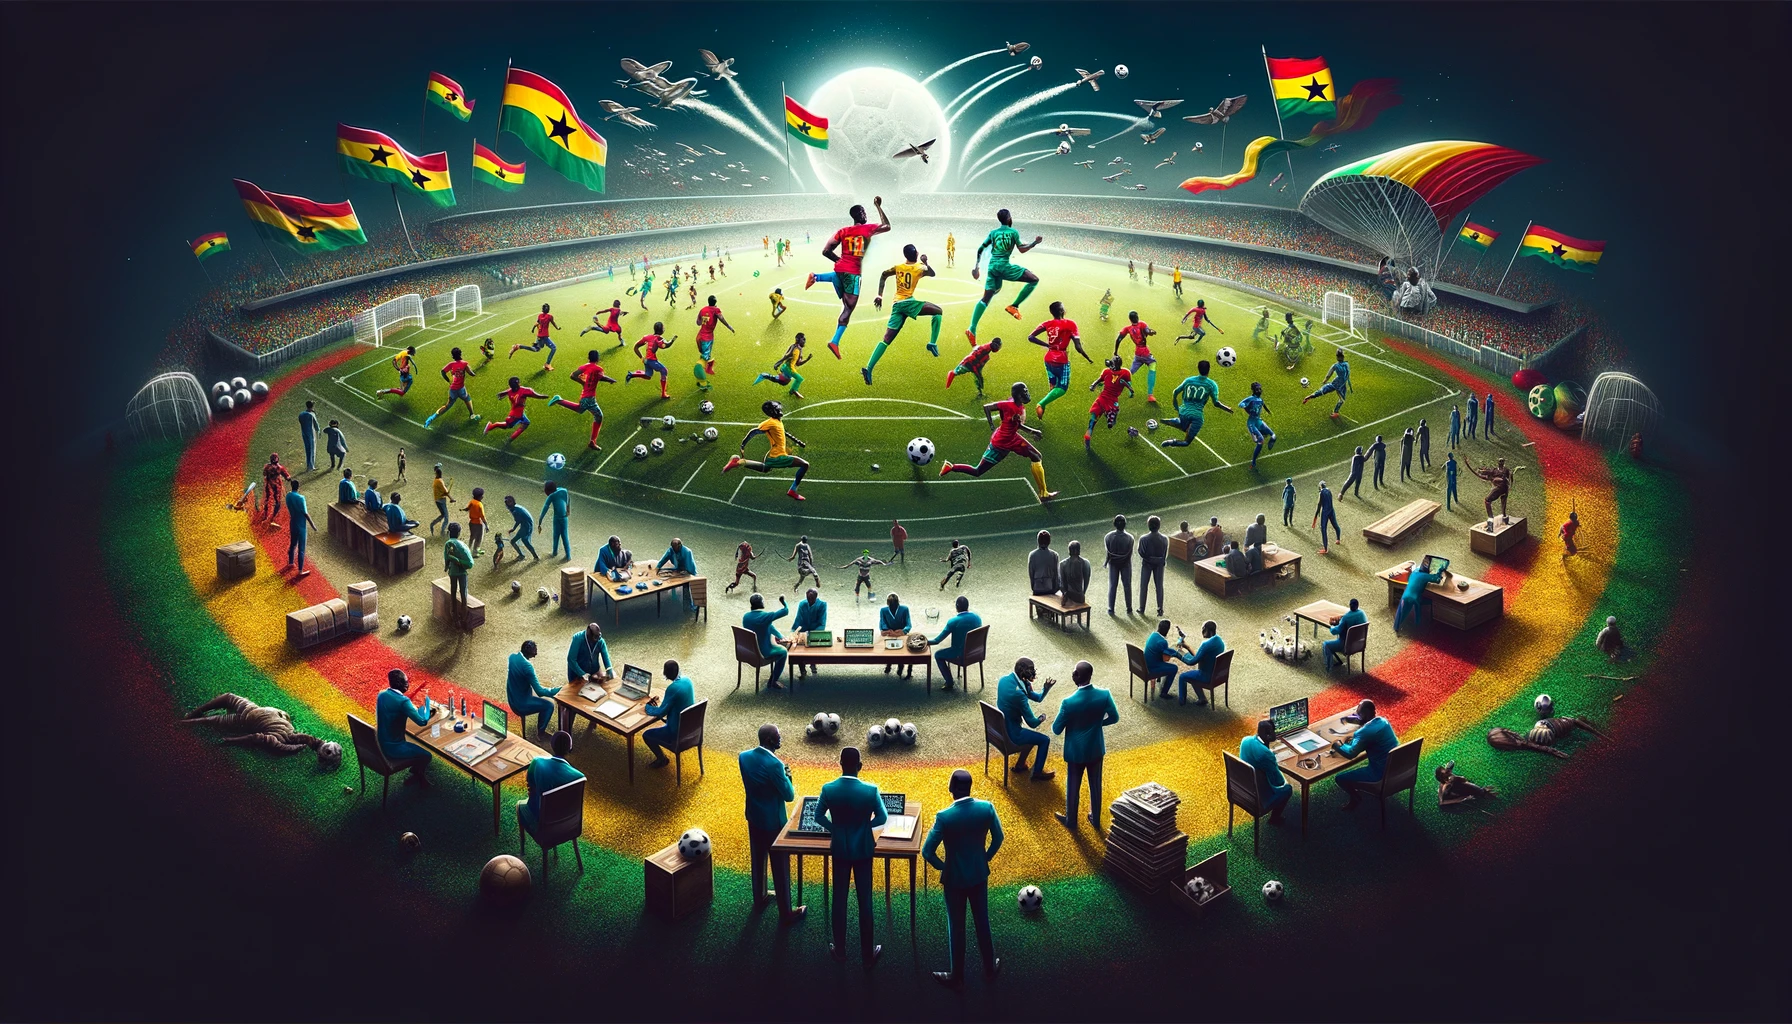  "Revolution on the Field: Unpacking the Ghanaian National Team's Tactical Transformation"